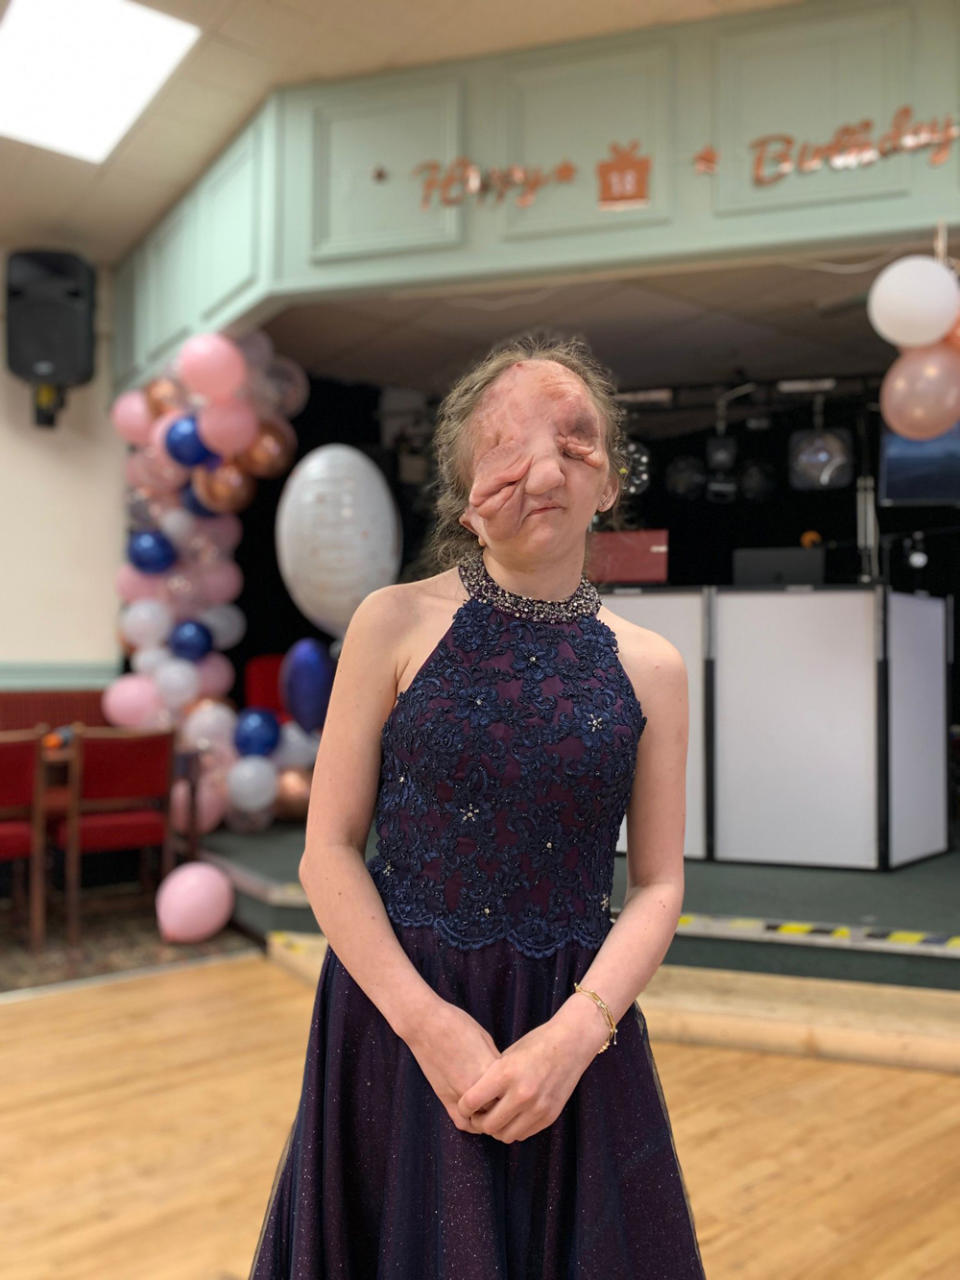 Lizzy ready to party on her 18th birthday (Collect/PA Real Life)